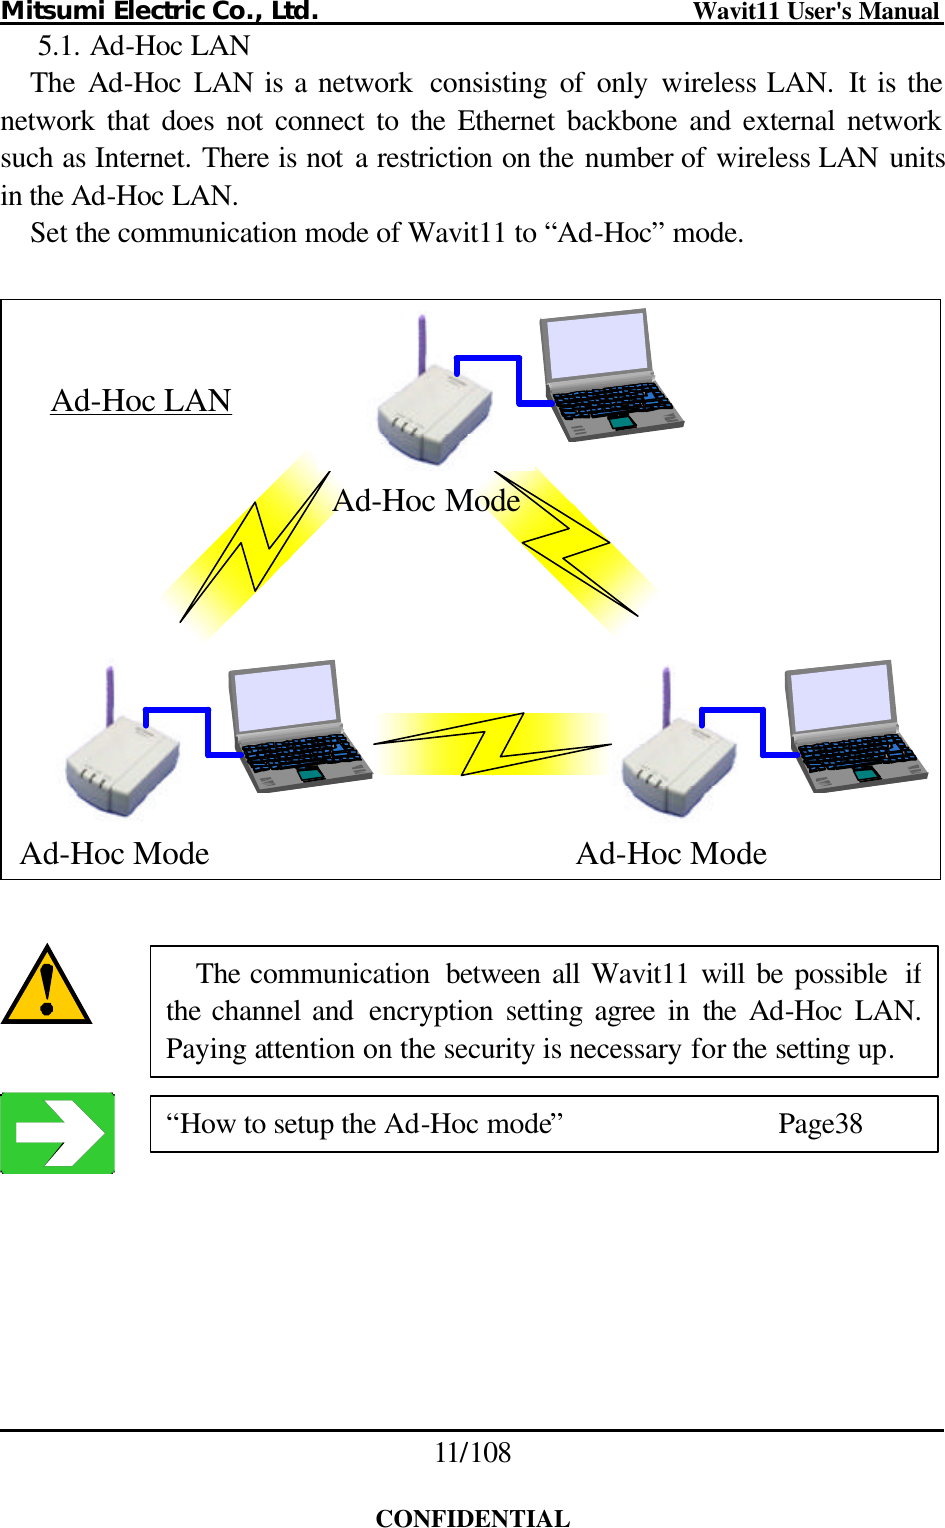 Mitsumi Electric Co., Ltd.                              Wavit11 User&apos;s Manual 11/108  CONFIDENTIAL 5.1. Ad-Hoc LAN The  Ad-Hoc LAN is a network  consisting  of only wireless LAN.  It is the network that does not connect to the Ethernet backbone and external network such as Internet. There is not a restriction on the number of wireless LAN units in the Ad-Hoc LAN. Set the communication mode of Wavit11 to “Ad-Hoc” mode.  Ad-Hoc ModeAd-Hoc ModeAd-Hoc ModeAd-Hoc LAN      The communication  between all Wavit11 will be possible if the channel and  encryption setting agree in the Ad-Hoc LAN. Paying attention on the security is necessary for the setting up. “How to setup the Ad-Hoc mode”   Page38 